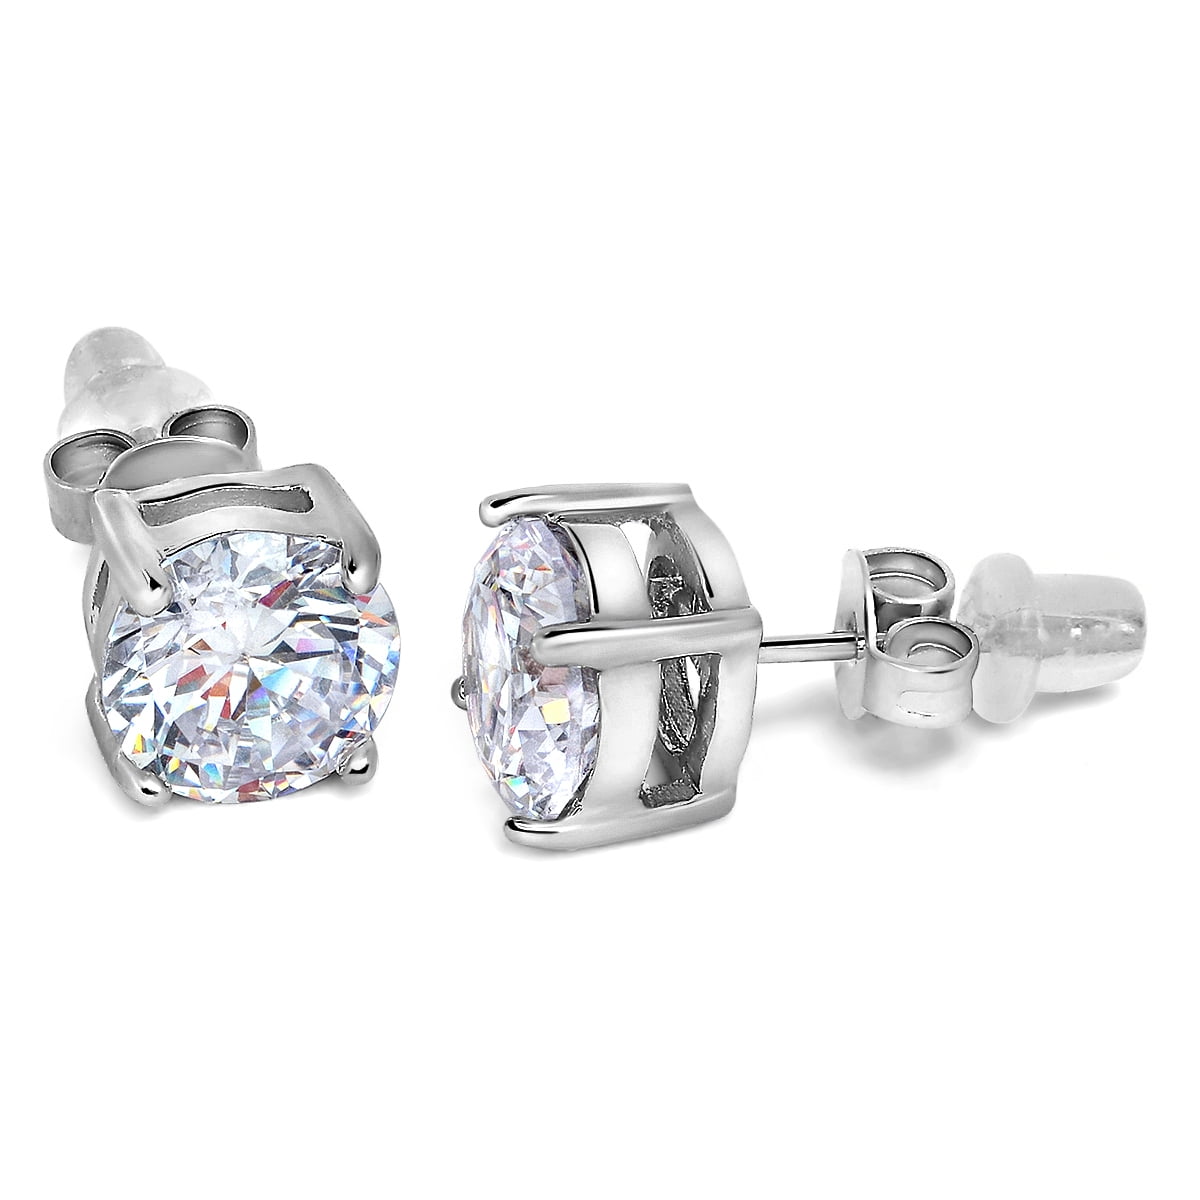 Details about   Buyless Fashion Girls Stud Earrings White Round And Black Crystal CZ 2 Pair Pack 